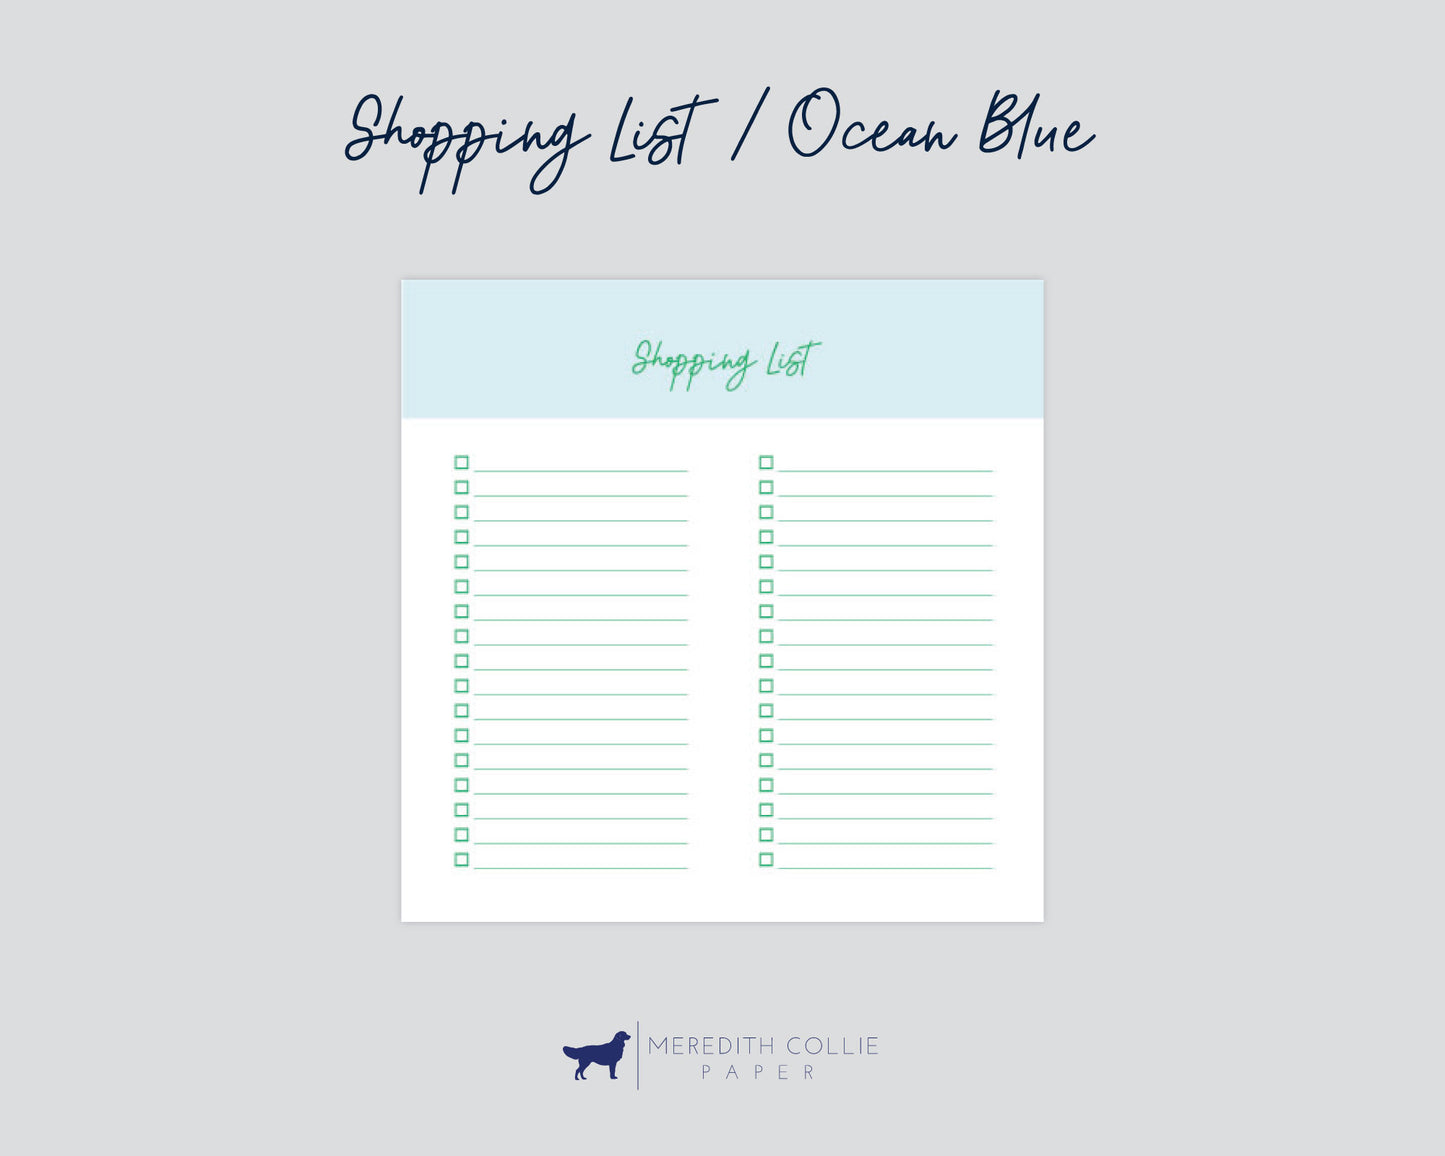 shopping list notepad mock up, ocean blue, Meredith Collie paper